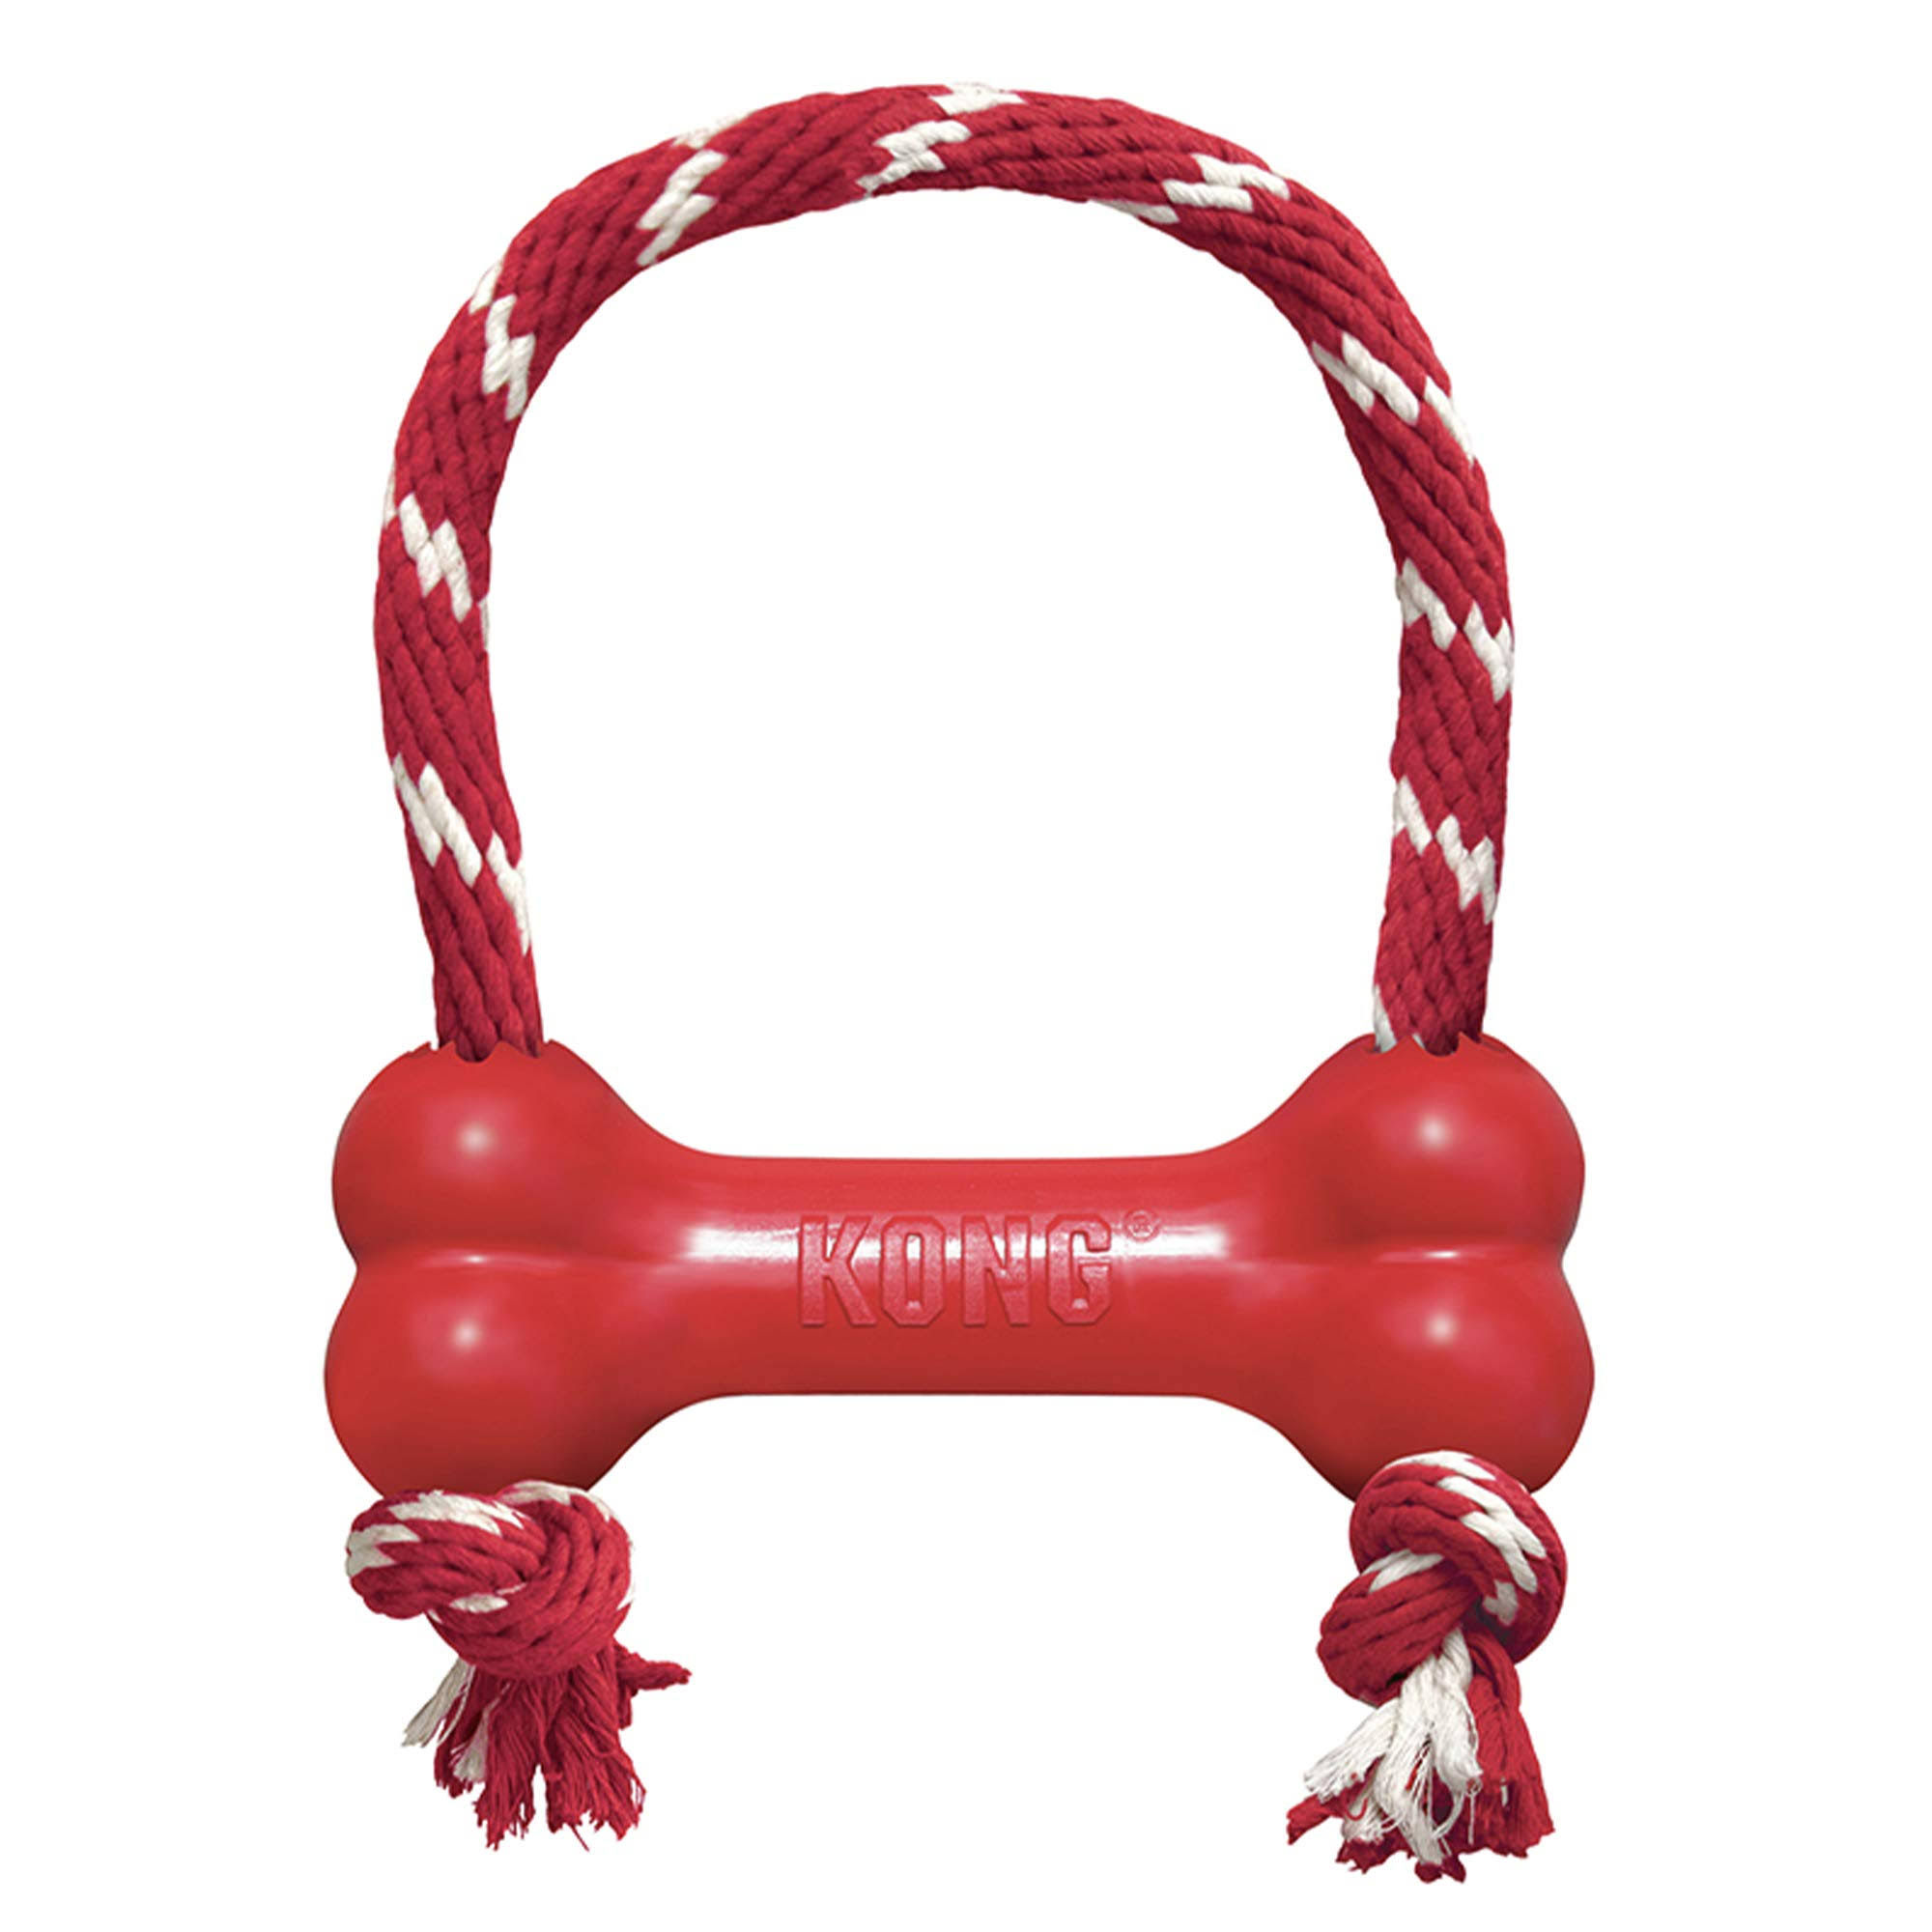 KONG Company Goodie Bone with Rope Dog Toy - Red, X-Small